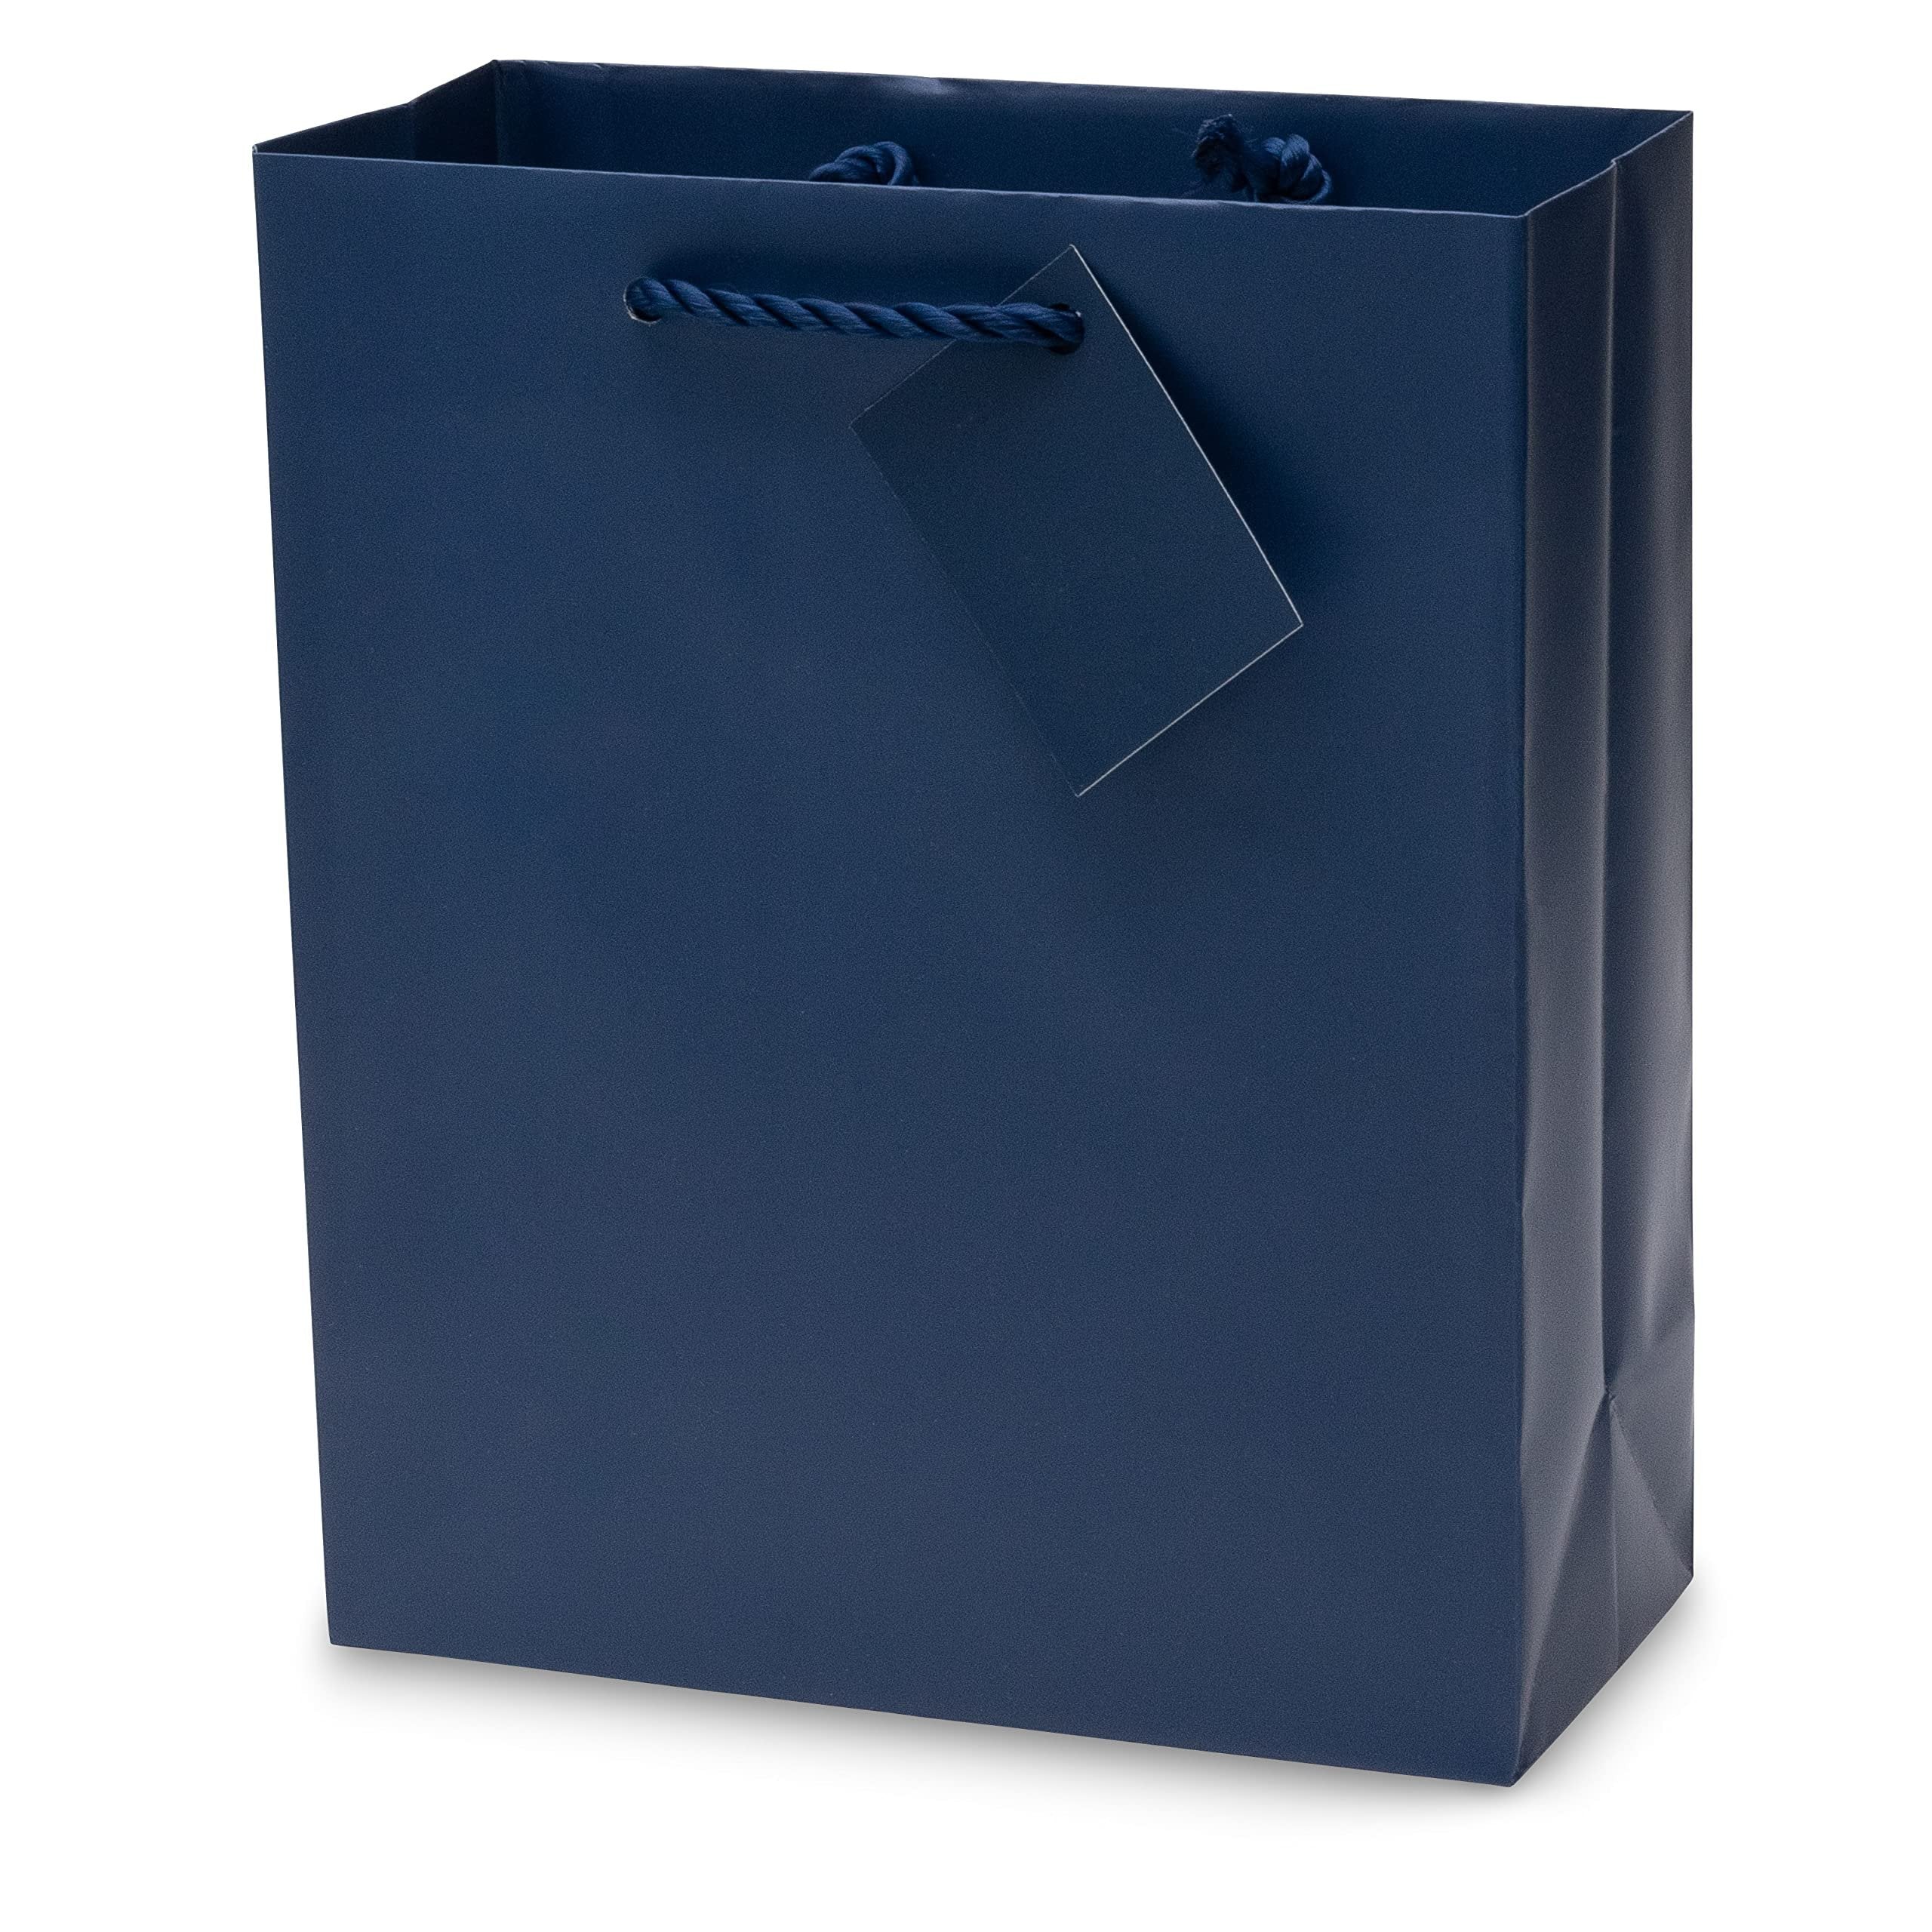 Blue Gift Bags - 12 Pack Medium Navy Paper Gift Bags with Rope Handles, Designer Solid Color Paper Gift Wrap Bags for Birthdays, Parties, Events, Bulk Favor Bags, Weddings or Any Occasion - 7.5x9x3.5